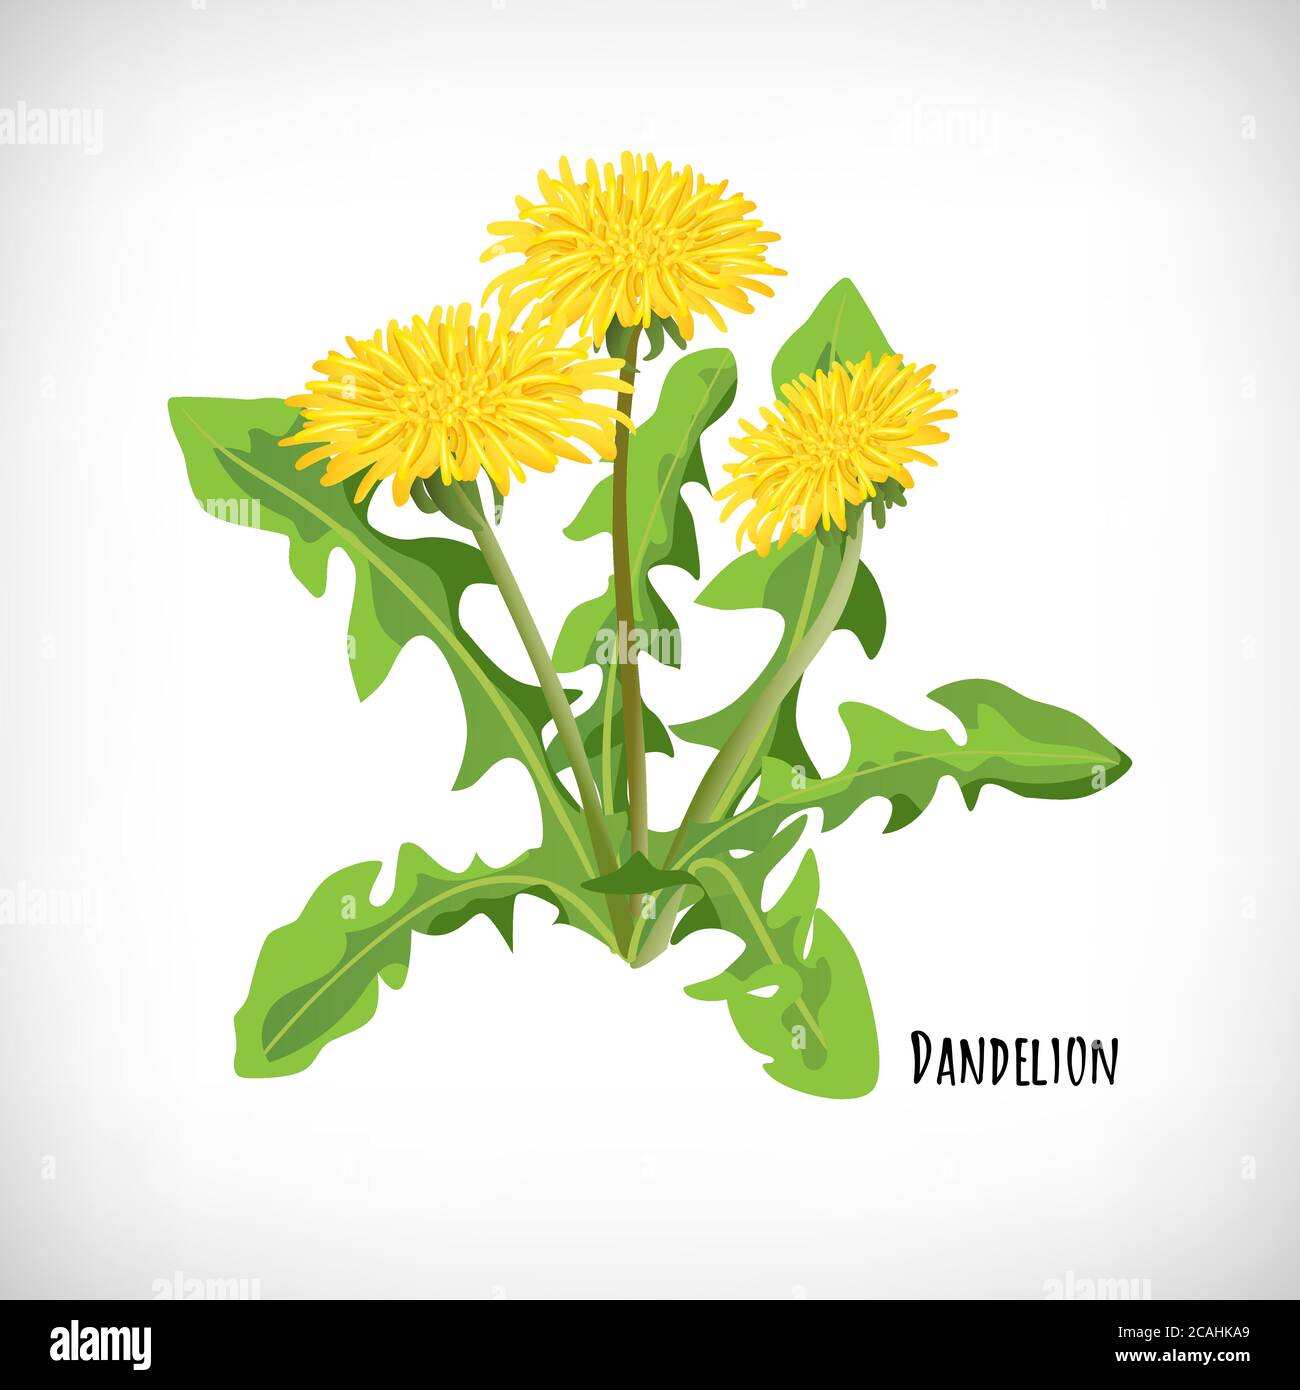 Dandelion leaves and flowers isolated on white background. Healthy diet, vegetarian organic food. Green medicinal plant in flat style. Lettering Dandelion. Herb collection. Vector illustration. Stock Vector